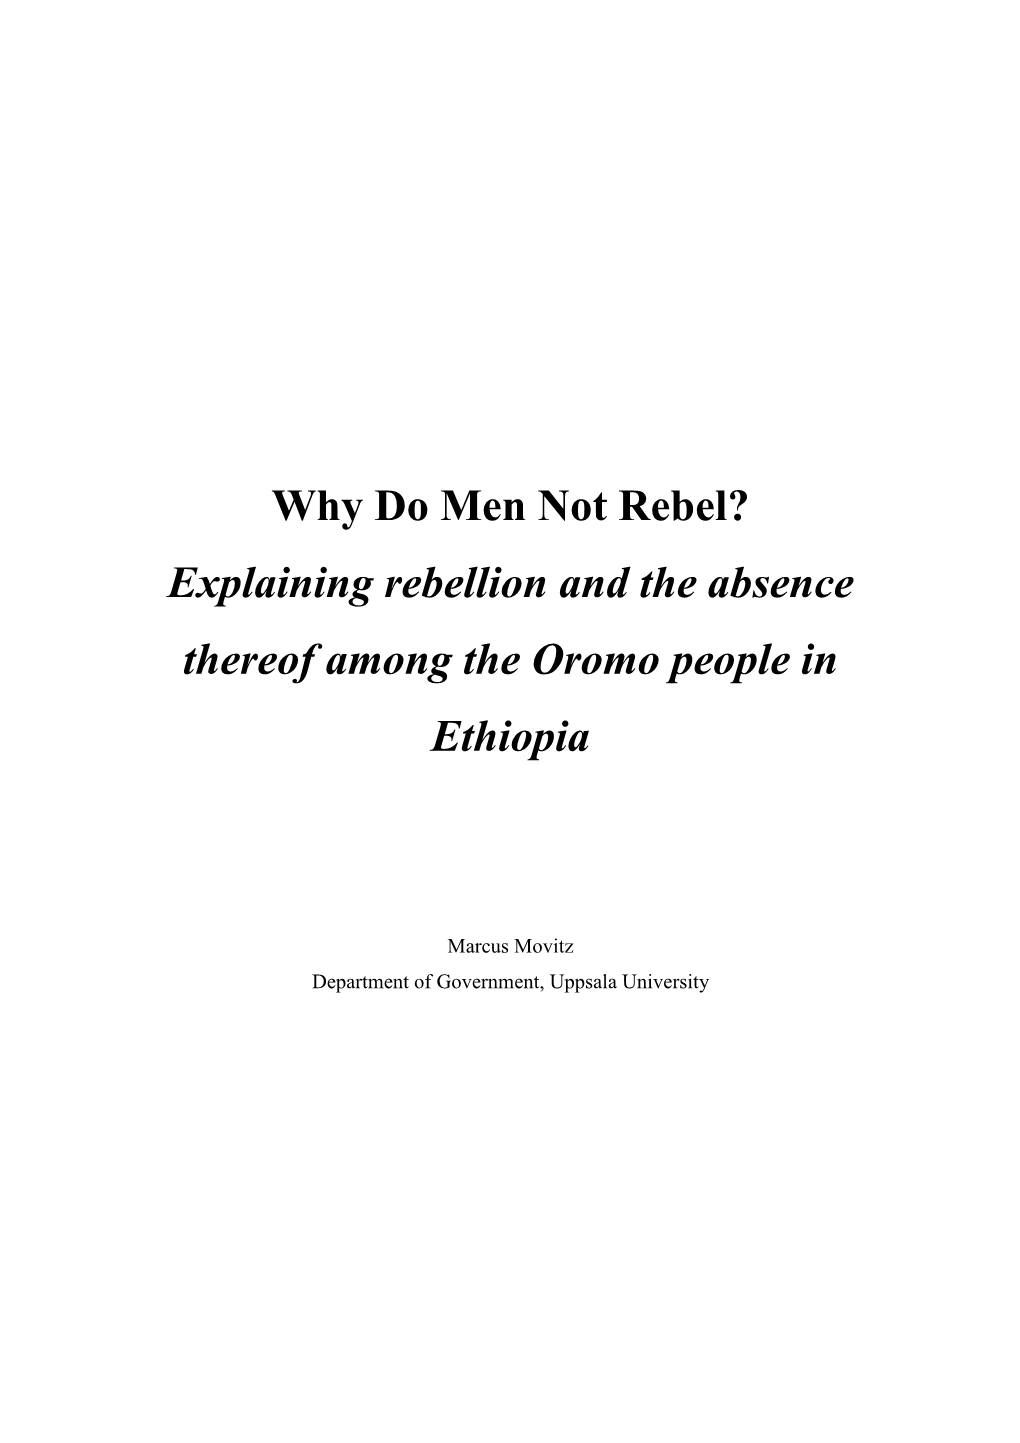 Why Do Men Not Rebel? Explaining Rebellion and the Absence Thereof Among the Oromo People in Ethiopia